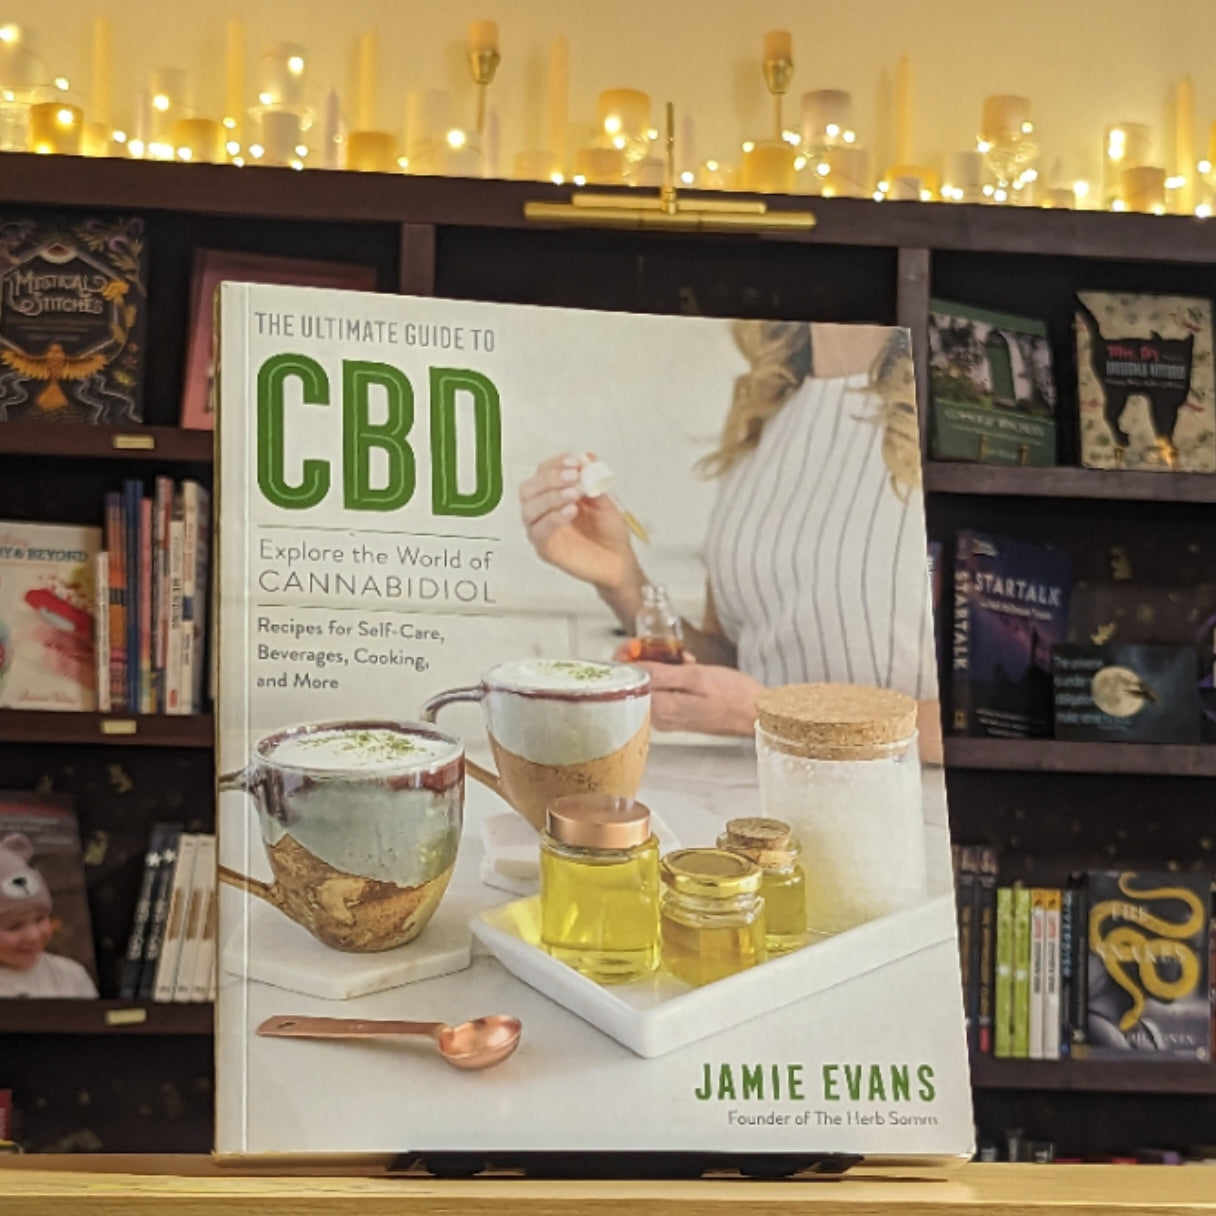 The Ultimate Guide to CBD: Explore the World of Cannabidiol - Recipes for Self-Care, Beverages, Cooking, and More (Volume 8) (The Ultimate Guide to..., 8)